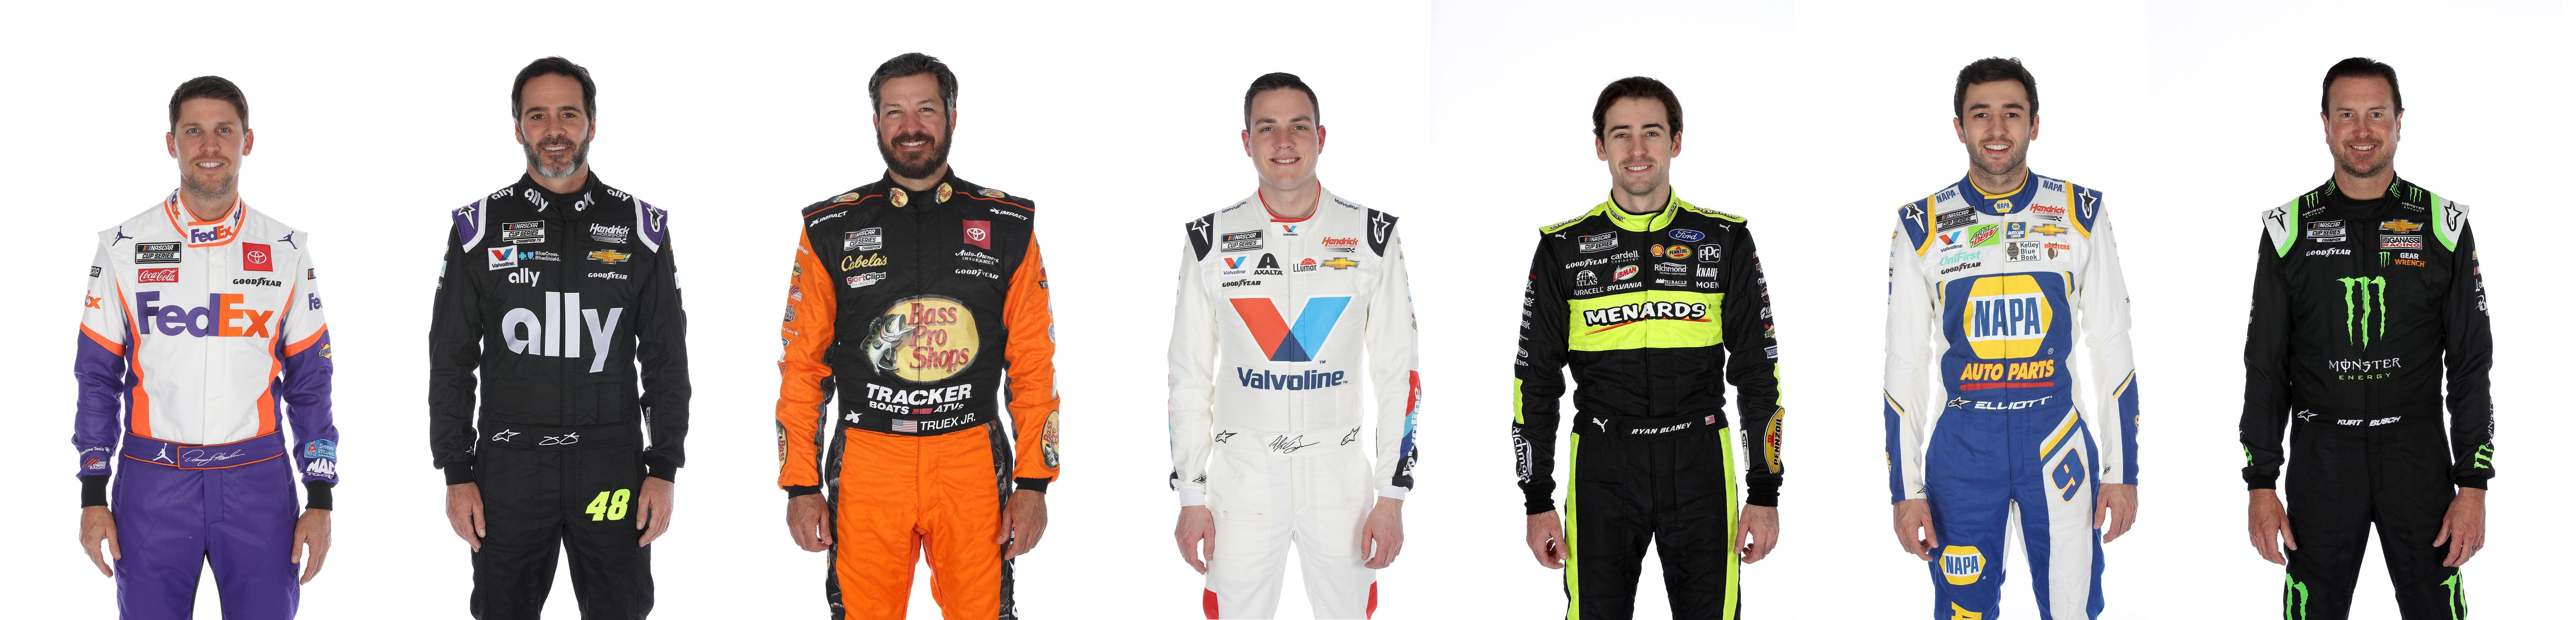 Well, one of these stock car heroes will win a grandfather clock, eh?